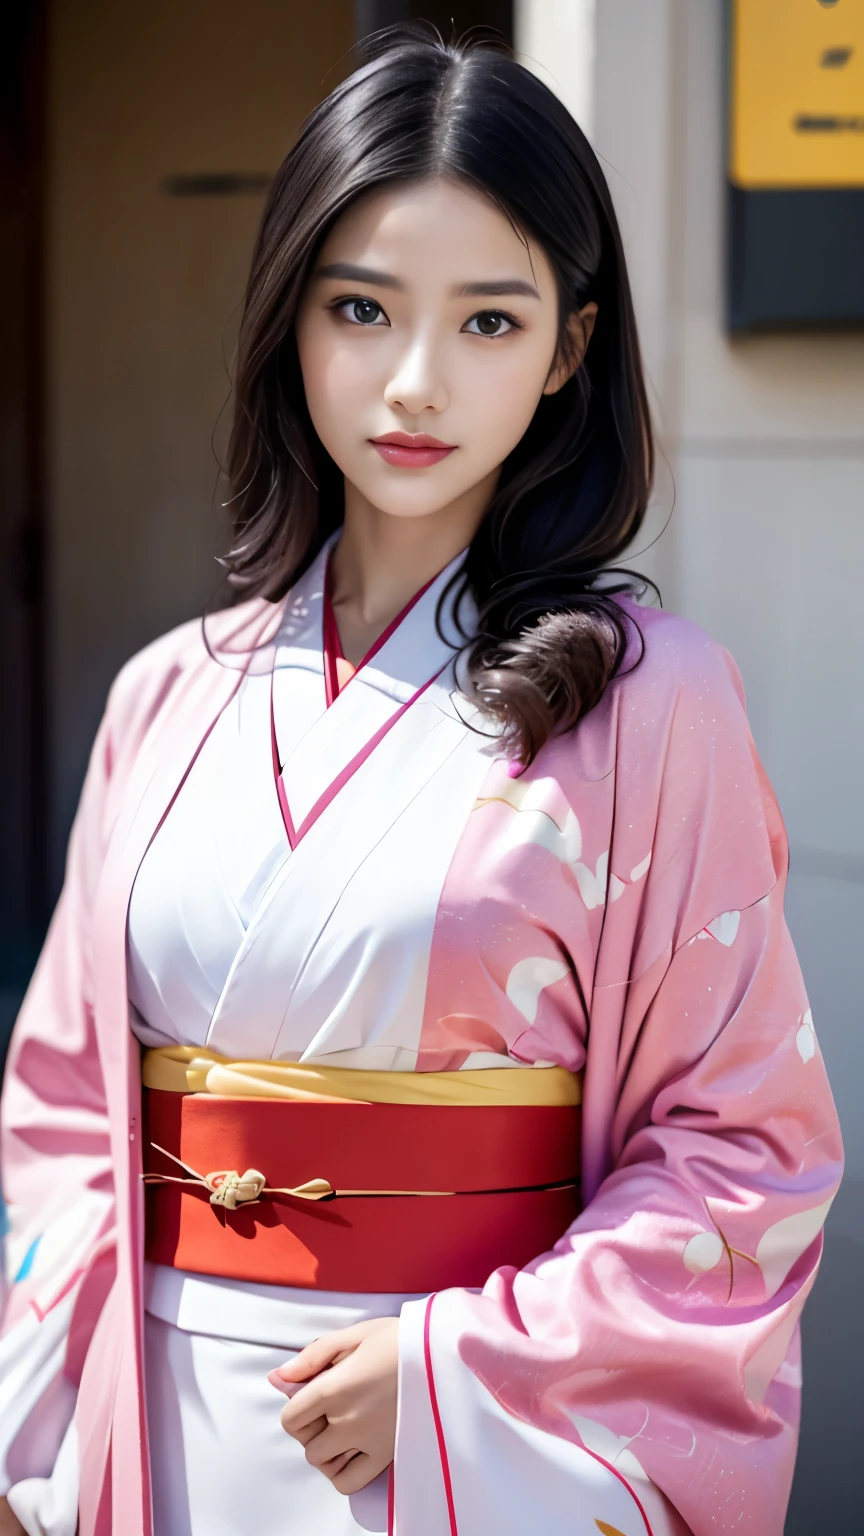 White kimono、Pink Japanese pattern、(Long-sleeved kimono:1.5)、or、(Top Grade)、1 female、16 years old、Whole Body Ezbian、Black-haired、Tie your hair back、(Realistic:1.7)、((Best image quality))、Absurd、(超A high resolution)、(Photoreal:1.6)、Photoreal、Octane Rendering、(超Realistic:1.2)、(Realistic face:1.2)、(8k)、(4K)、(masterpiece)、(Realistic skin texture)、(Awareness-raising、Cinema Lighting、wall-)、(Beautiful Eyes:1.2)、((((Perfect Face))))、(A cute face like an idol:1.2)、( Are standing)、shrine、bird ready、(January)、Cute face with attention to detail、True Beauty、Laughter、